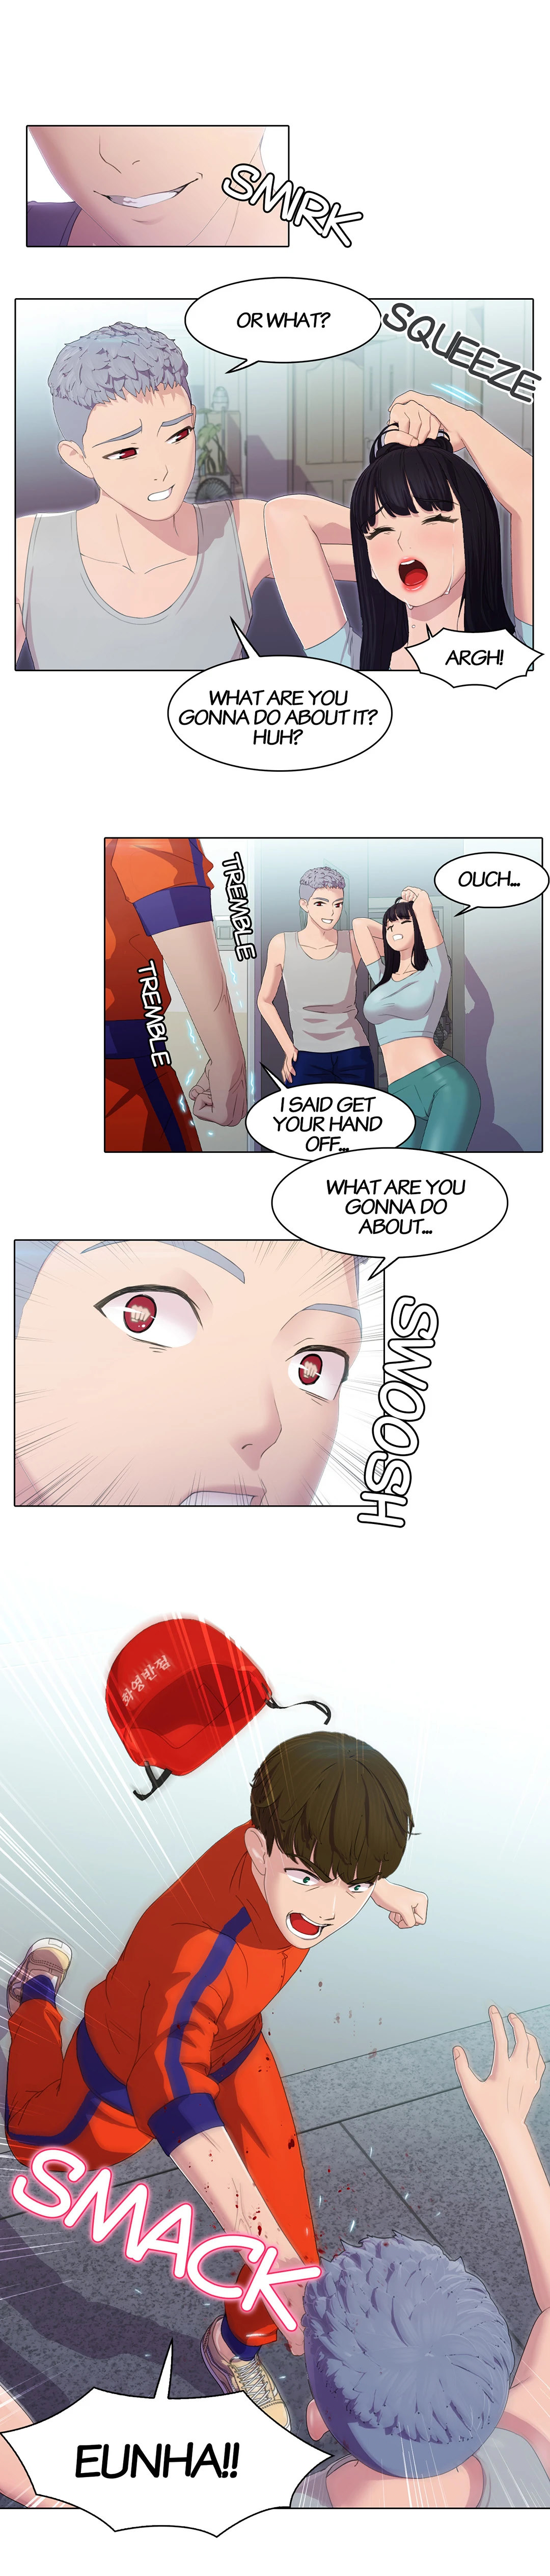 My Friend’s Sister - Chapter 1 Page 7